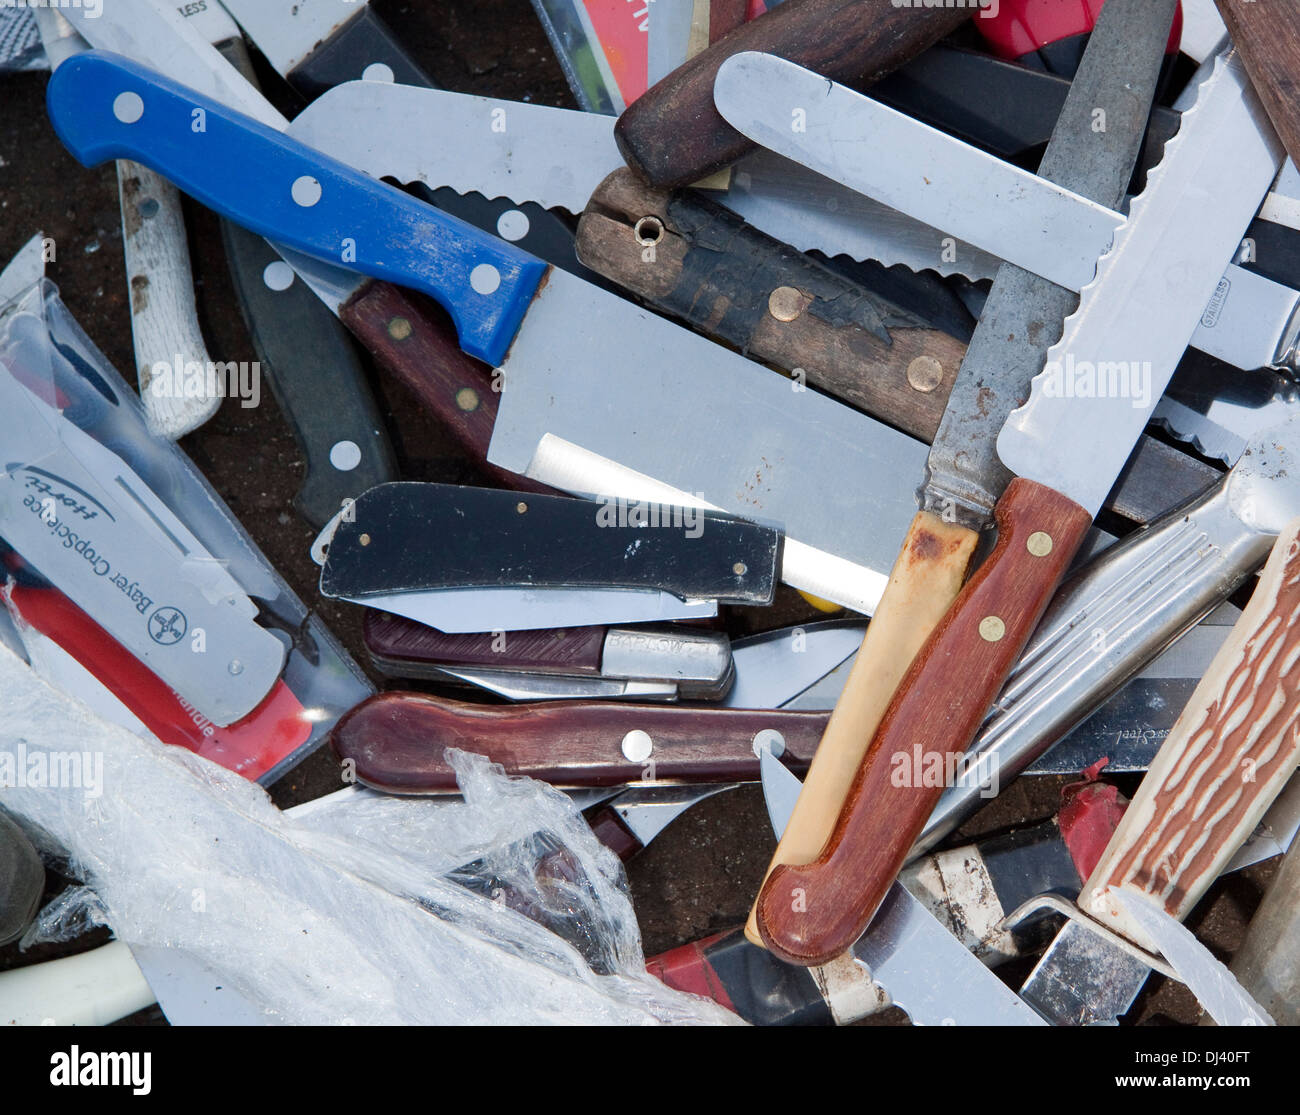 A pattern or background of kitchen and pocket knives Stock Photo